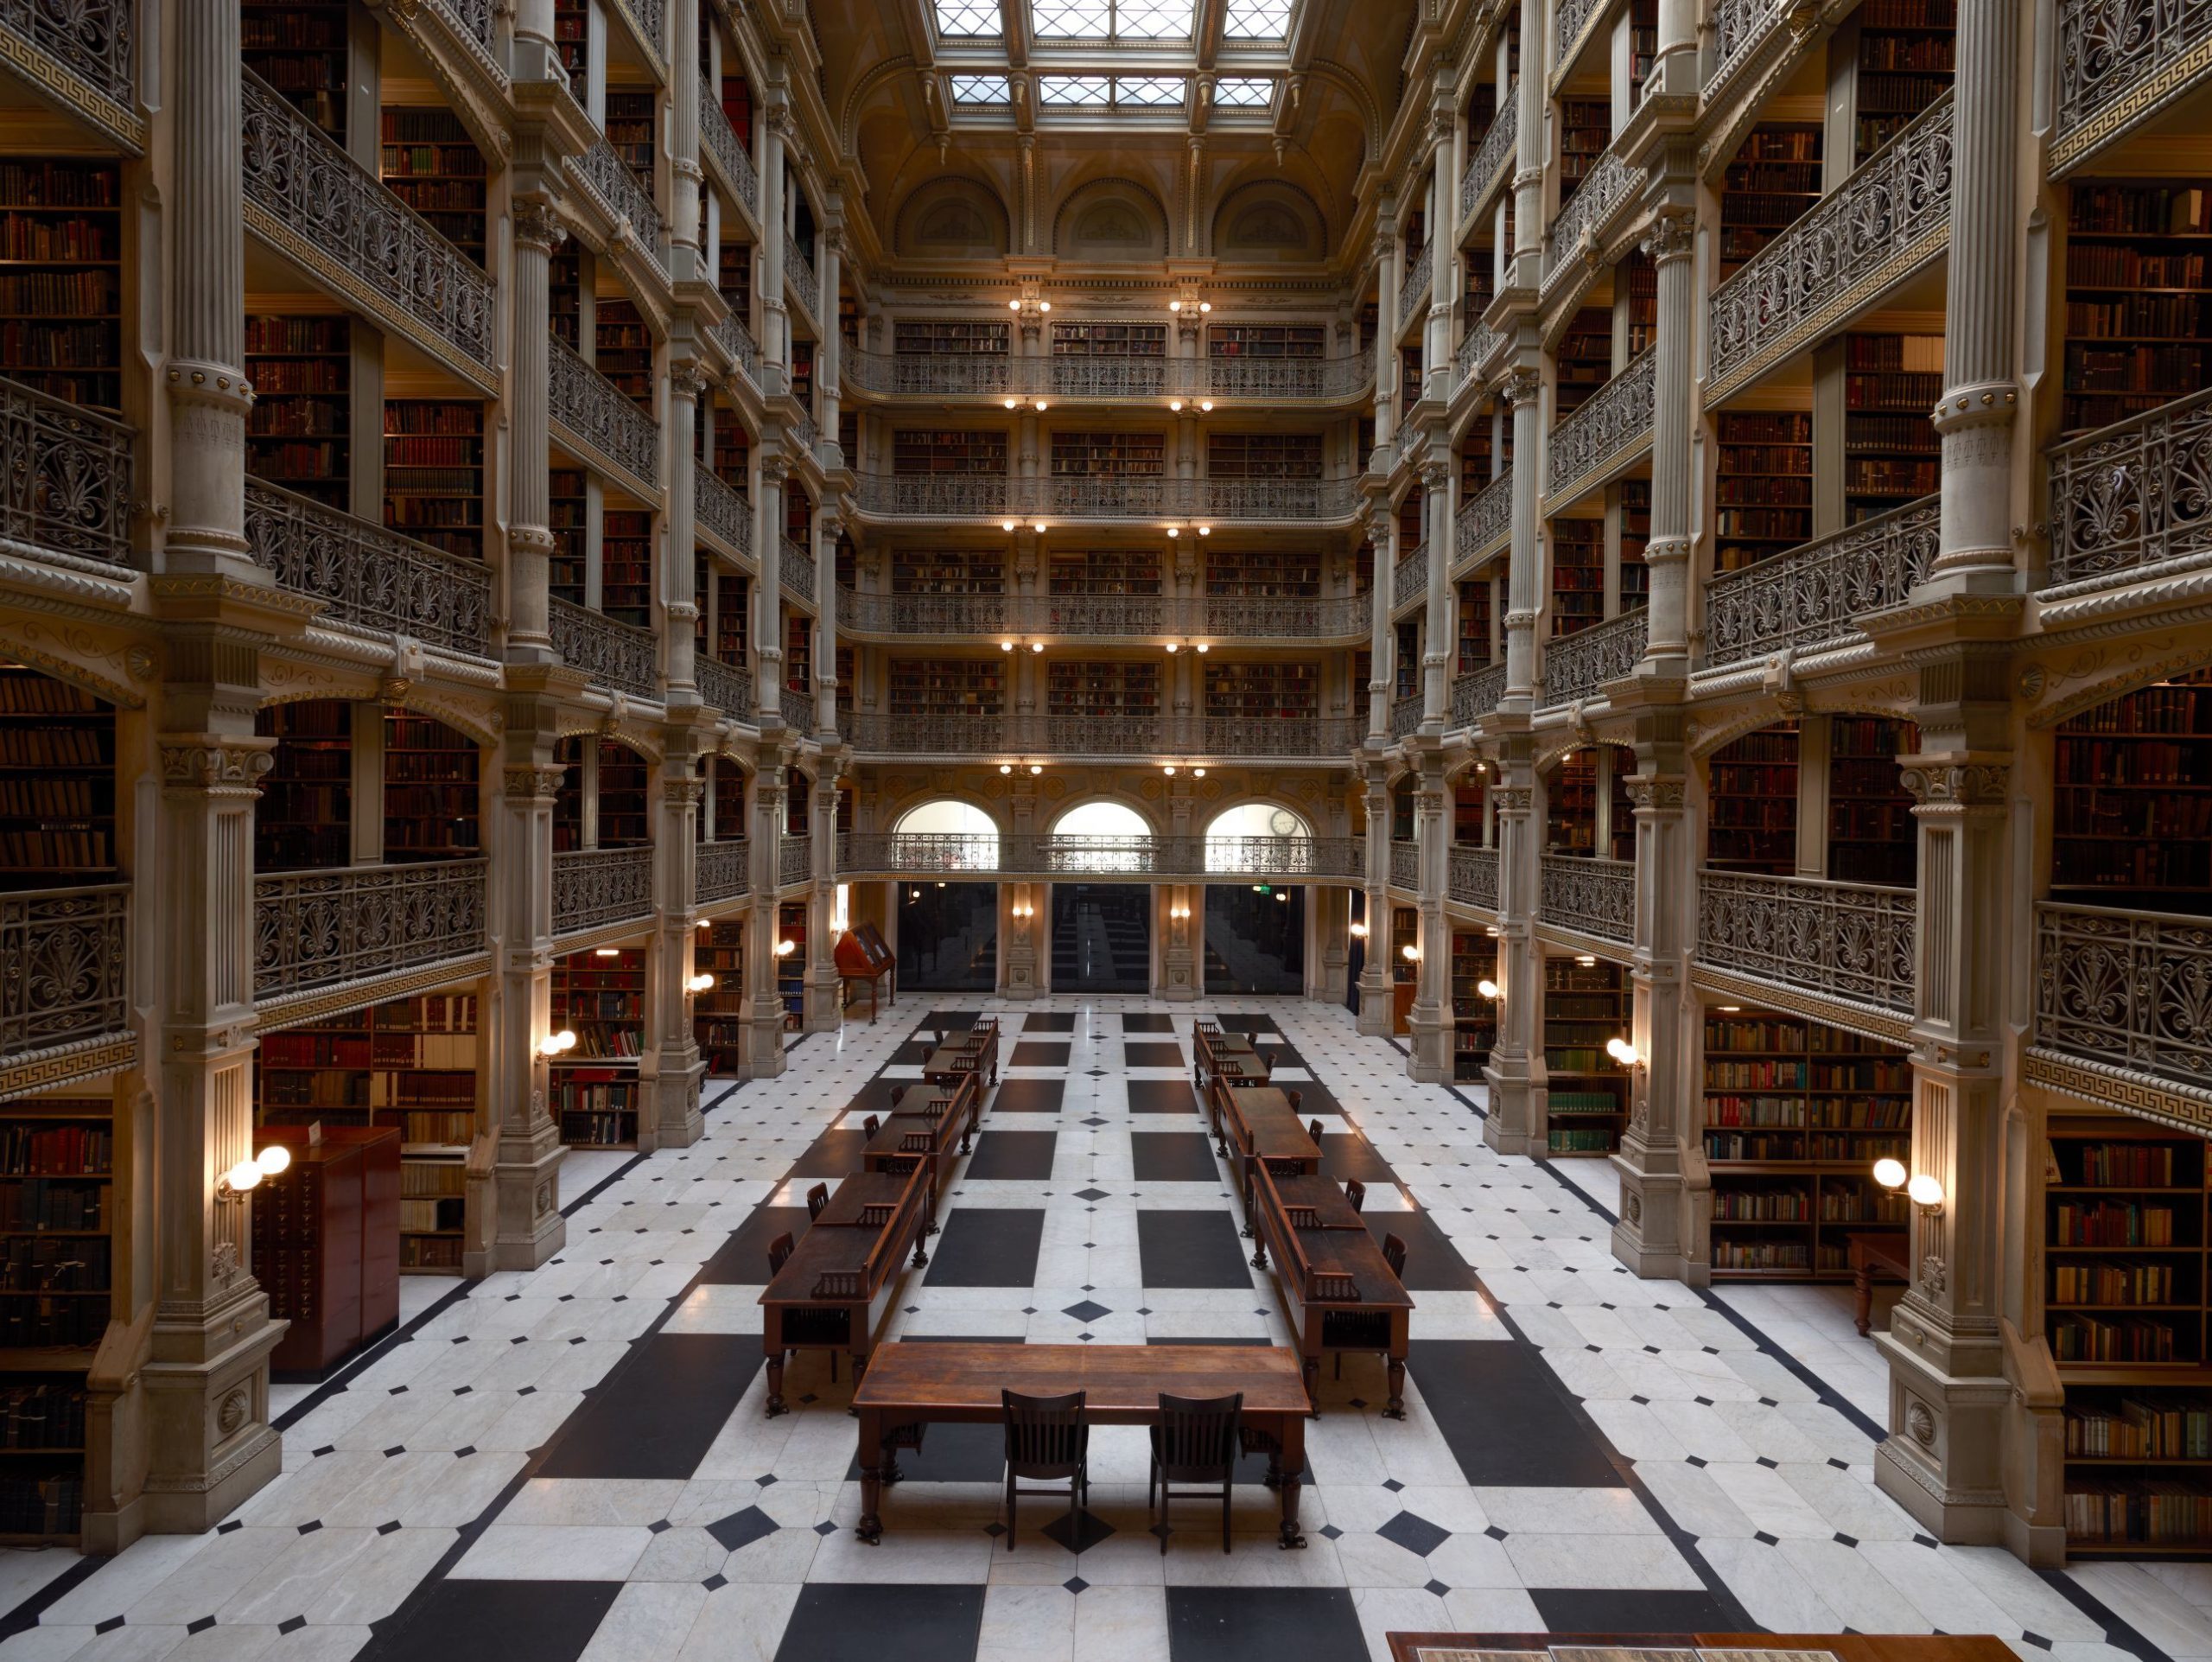 The George Peabody Library in Baltimore, Maryland Most Beautiful Libraries Around The World